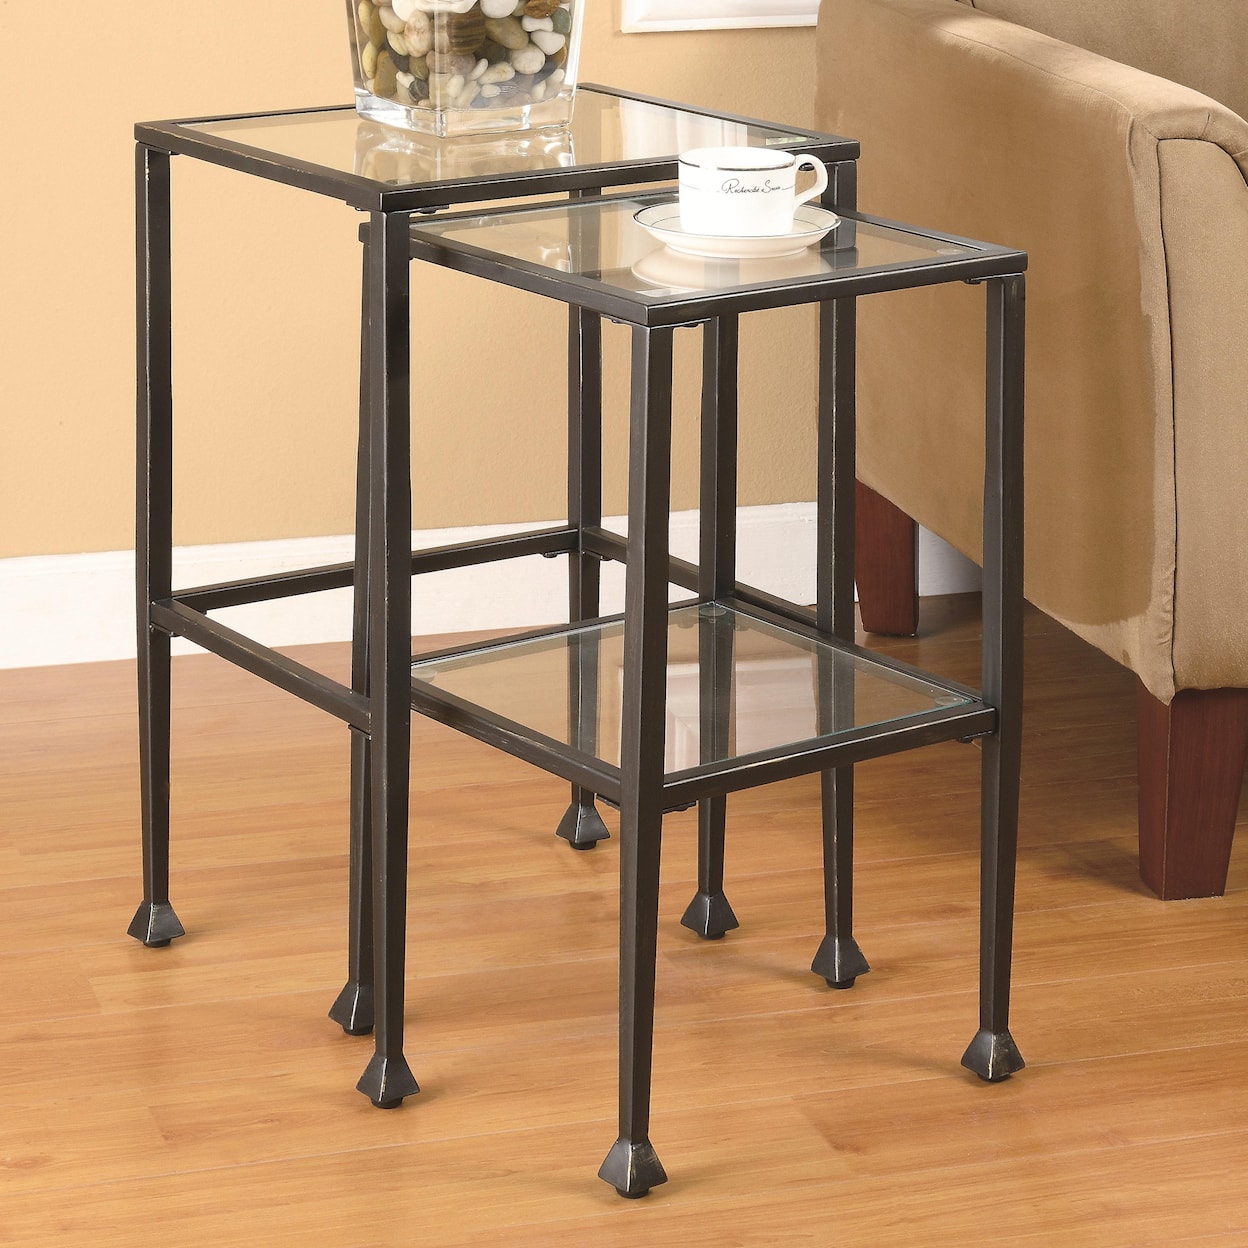 Coaster Nesting Tables Nesting Tables